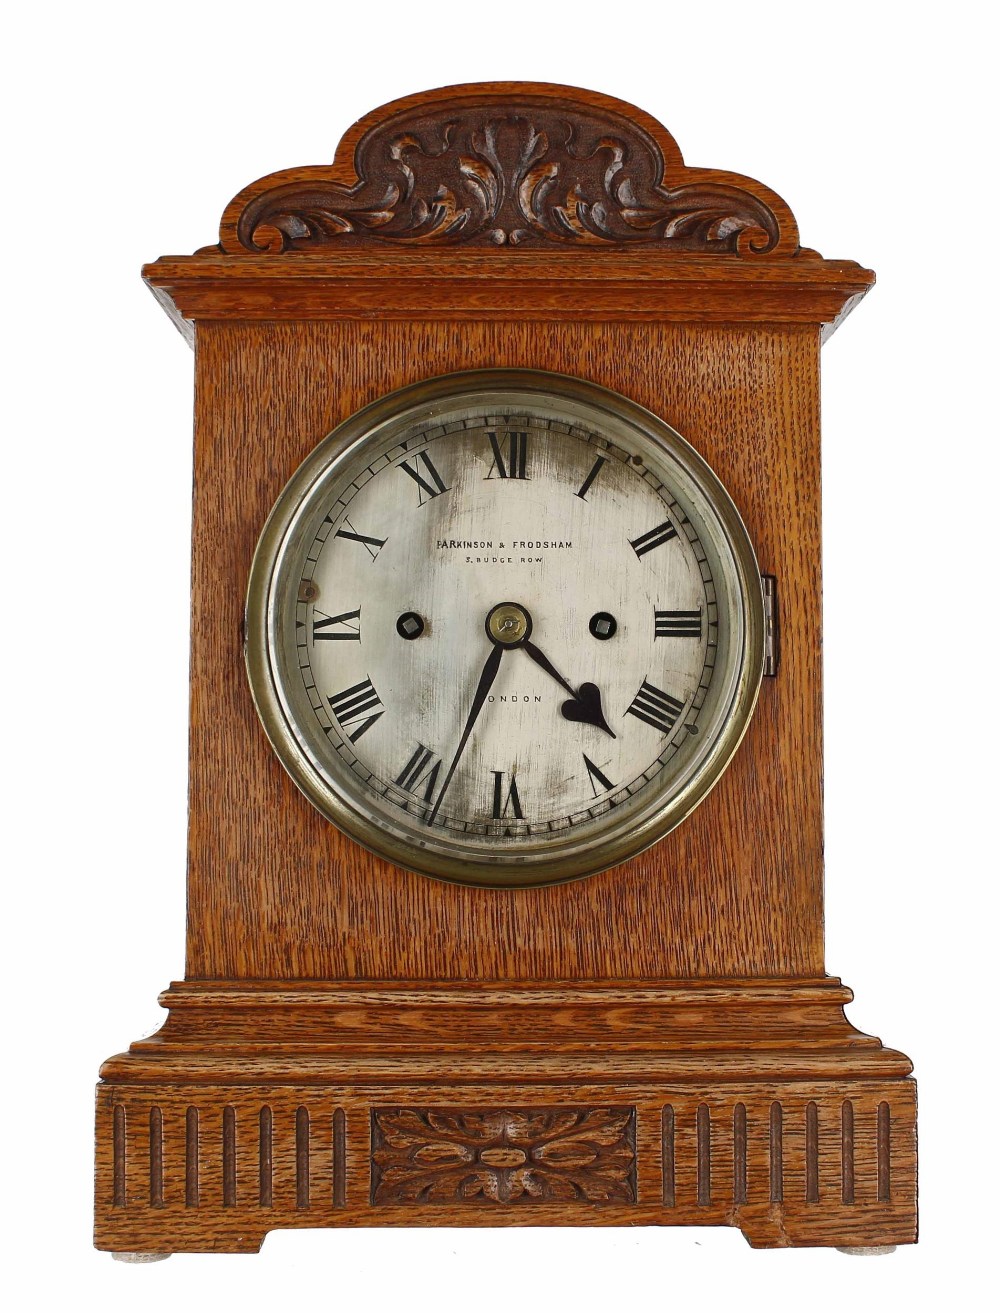 Good oak double fusee bracket clock, the 5.5" silvered dial signed Parkinson & Frodsham, 5 Budge